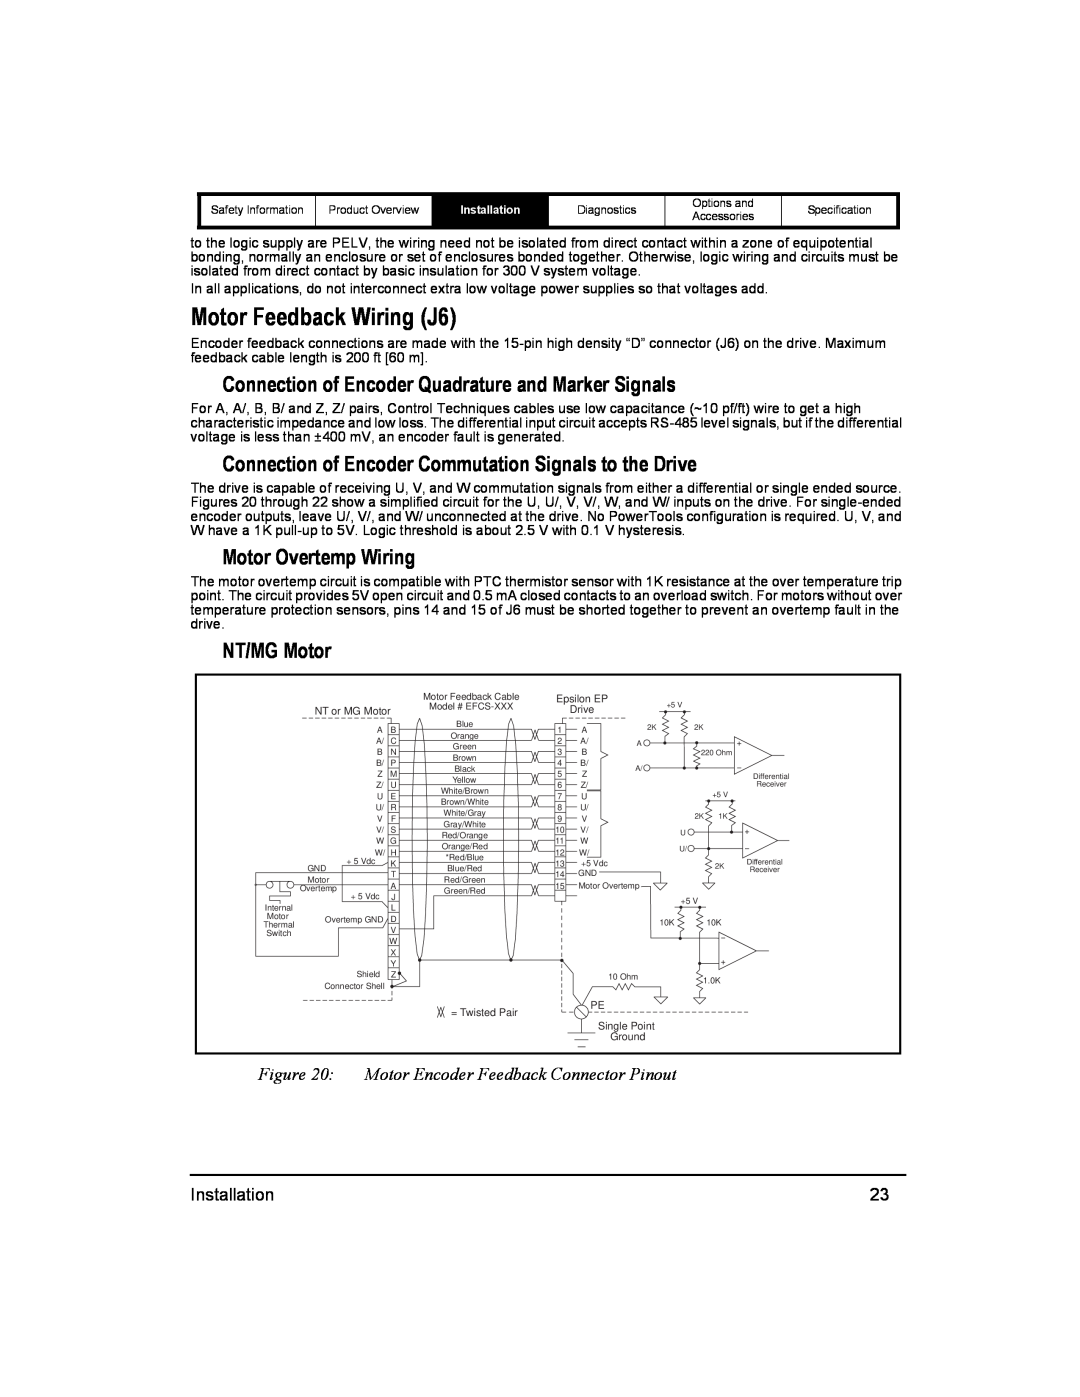 Emerson 400518-01 Motor Feedback Wiring J6, Connection of Encoder Quadrature and Marker Signals, Motor Overtemp Wiring 